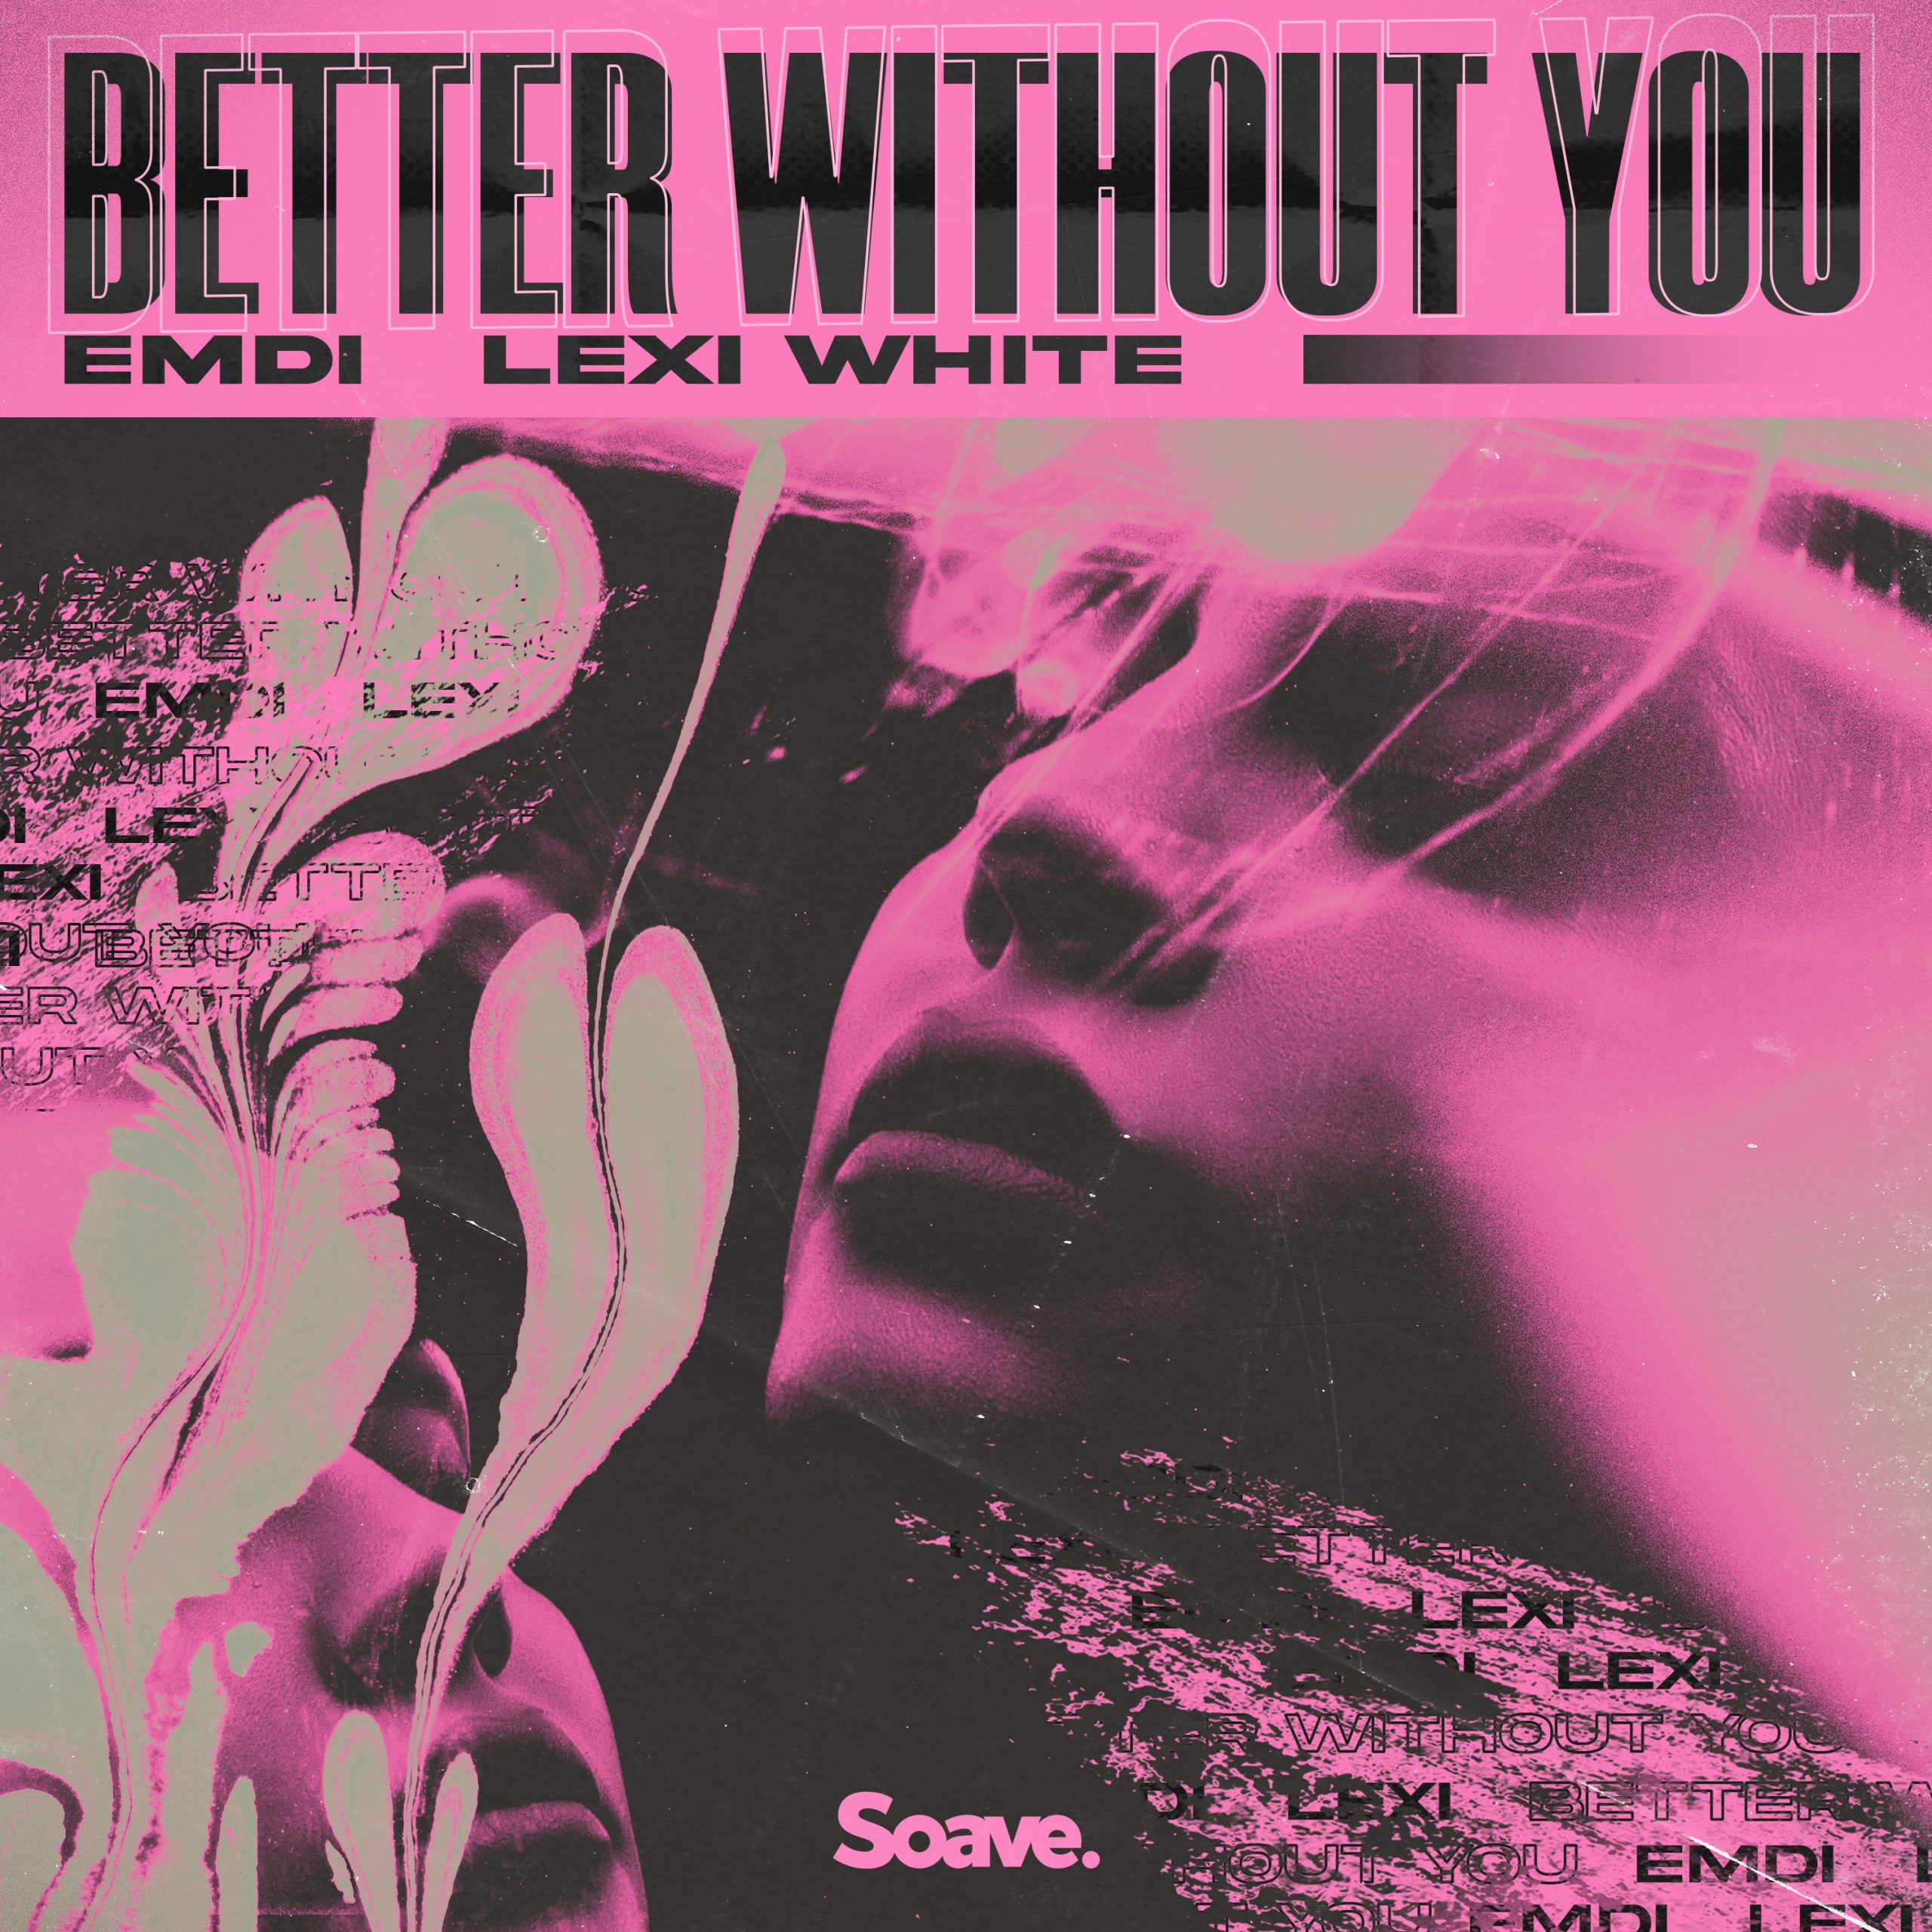 EMDI and Lexi White hit us with “Better Without You”